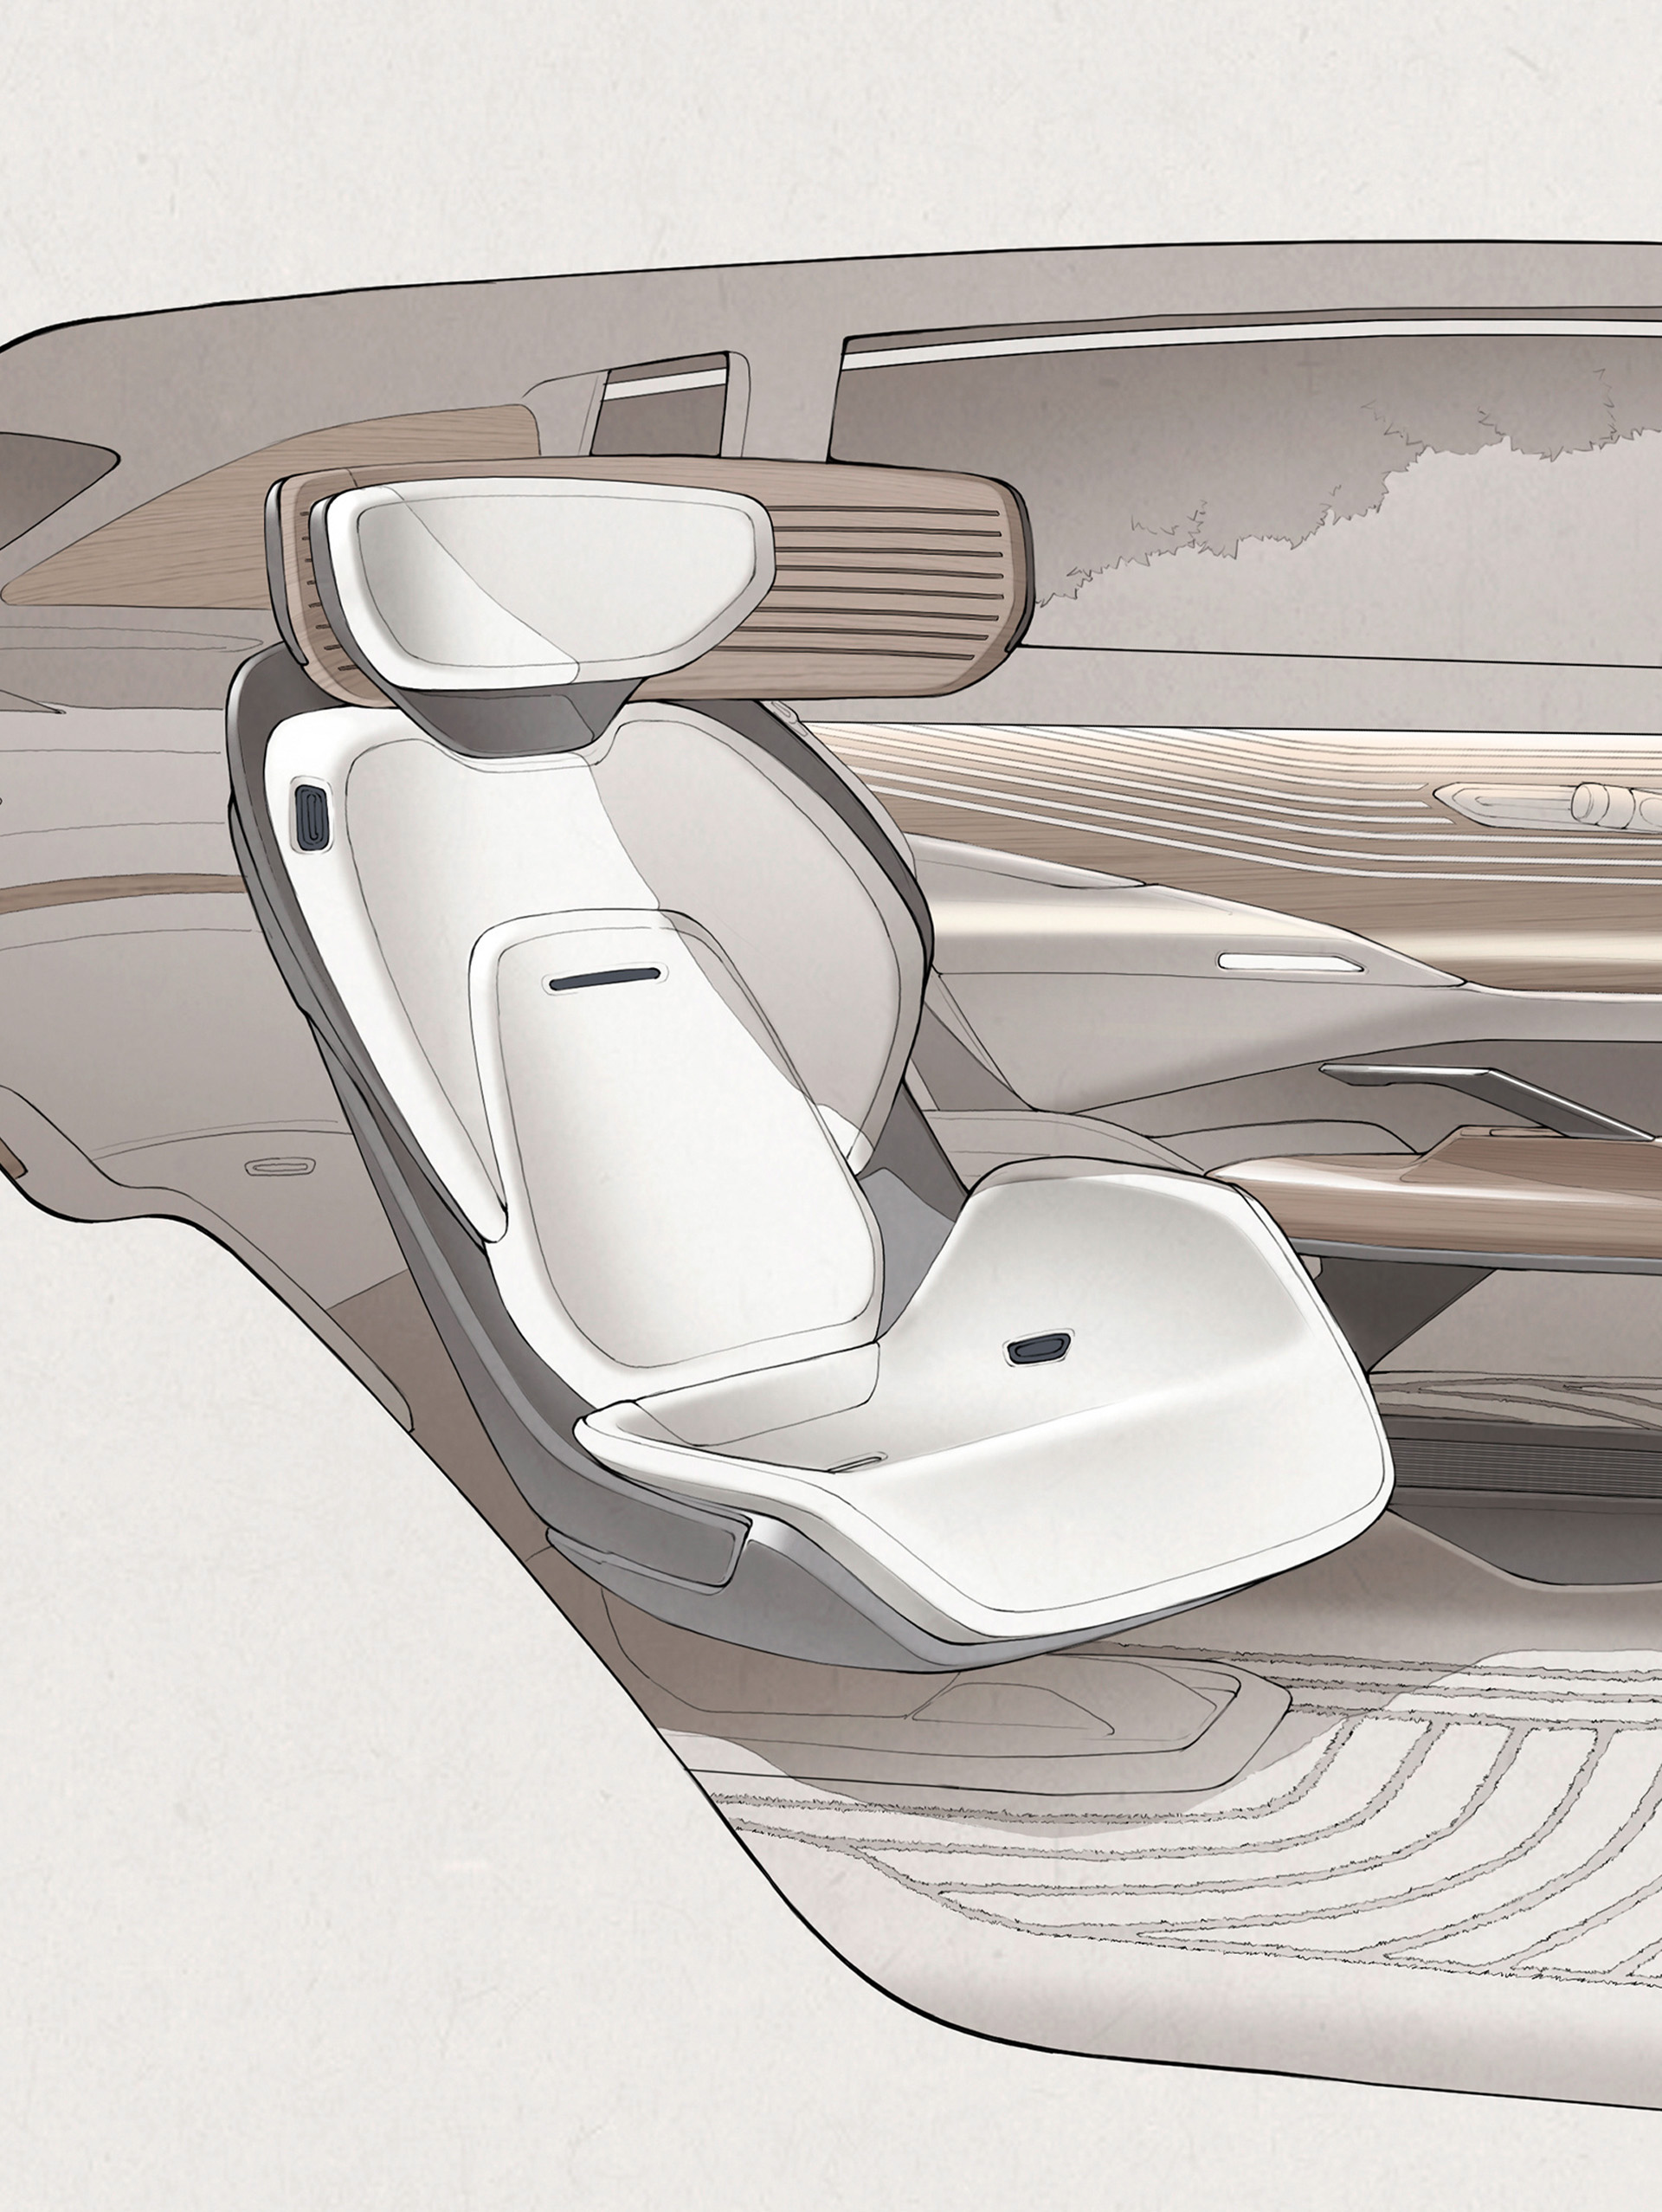 A sketch depicts a full-scale car seat in the Audi urbansphere concept.